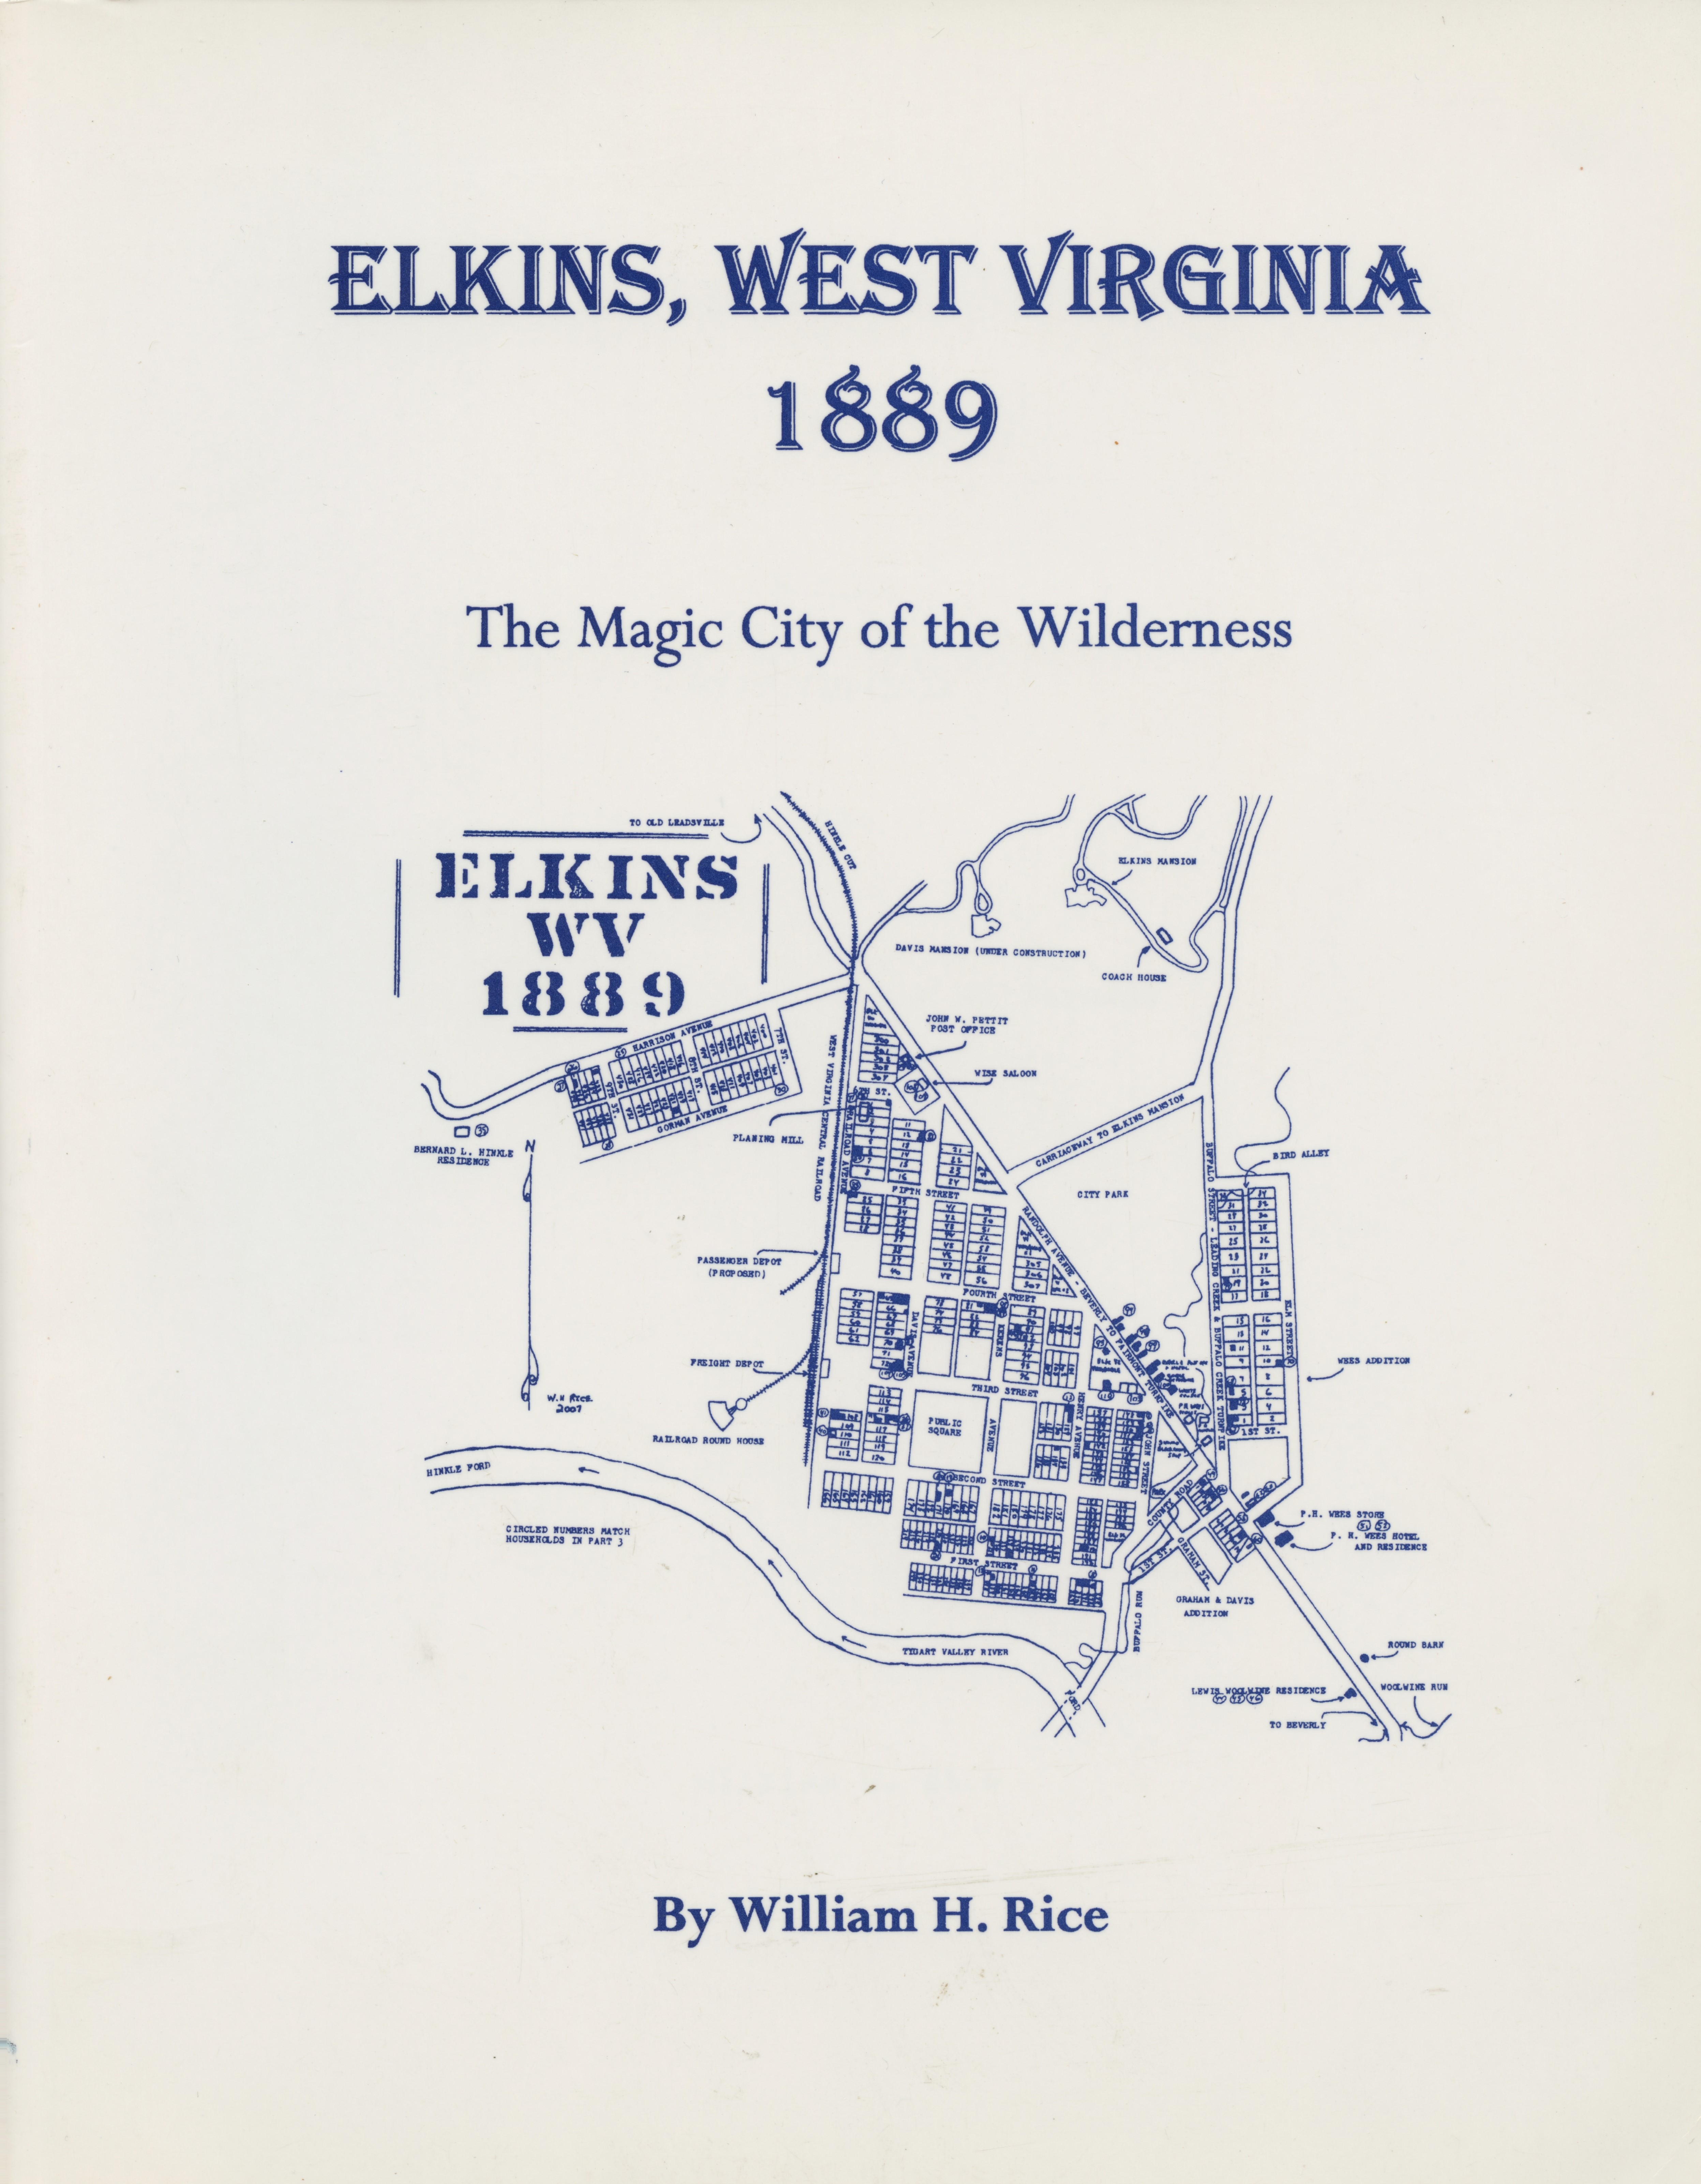 Elkins, West Virginia 1889, the Magic City of the Wilderness